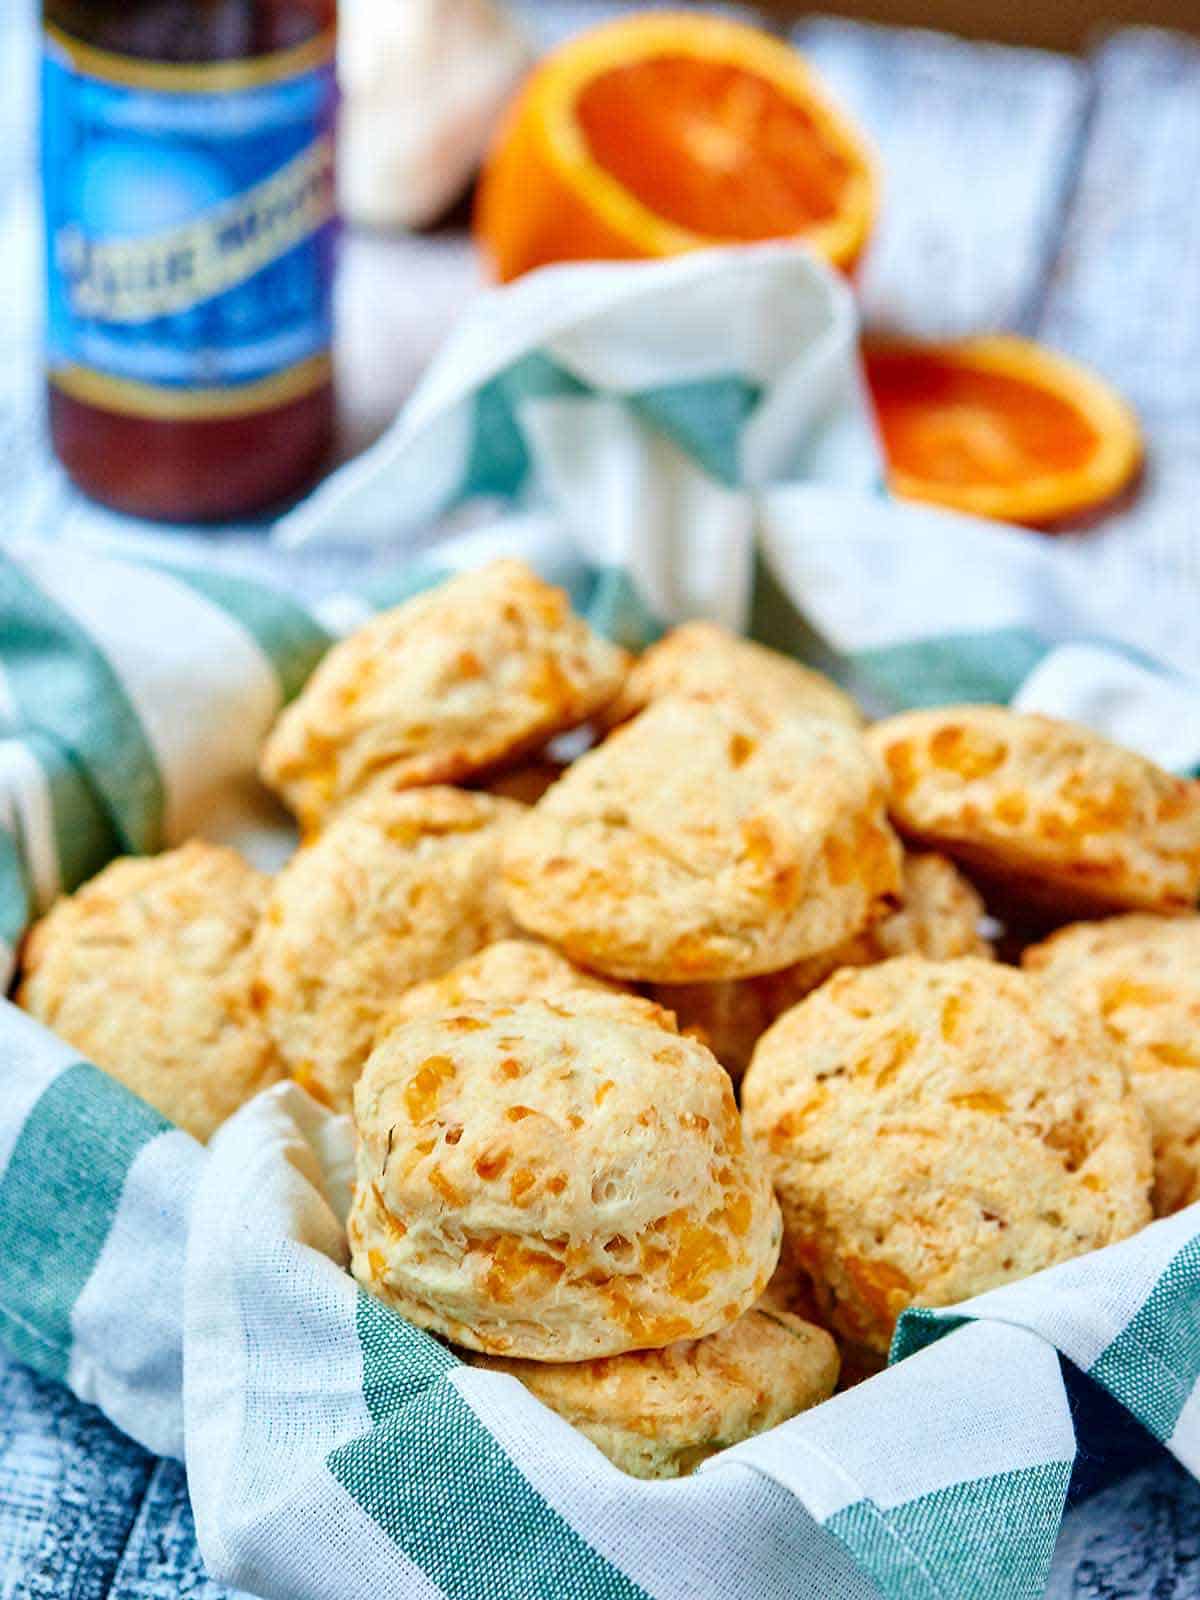 Roasted Garlic Cheddar Beer Biscuits - w/ Rosemary